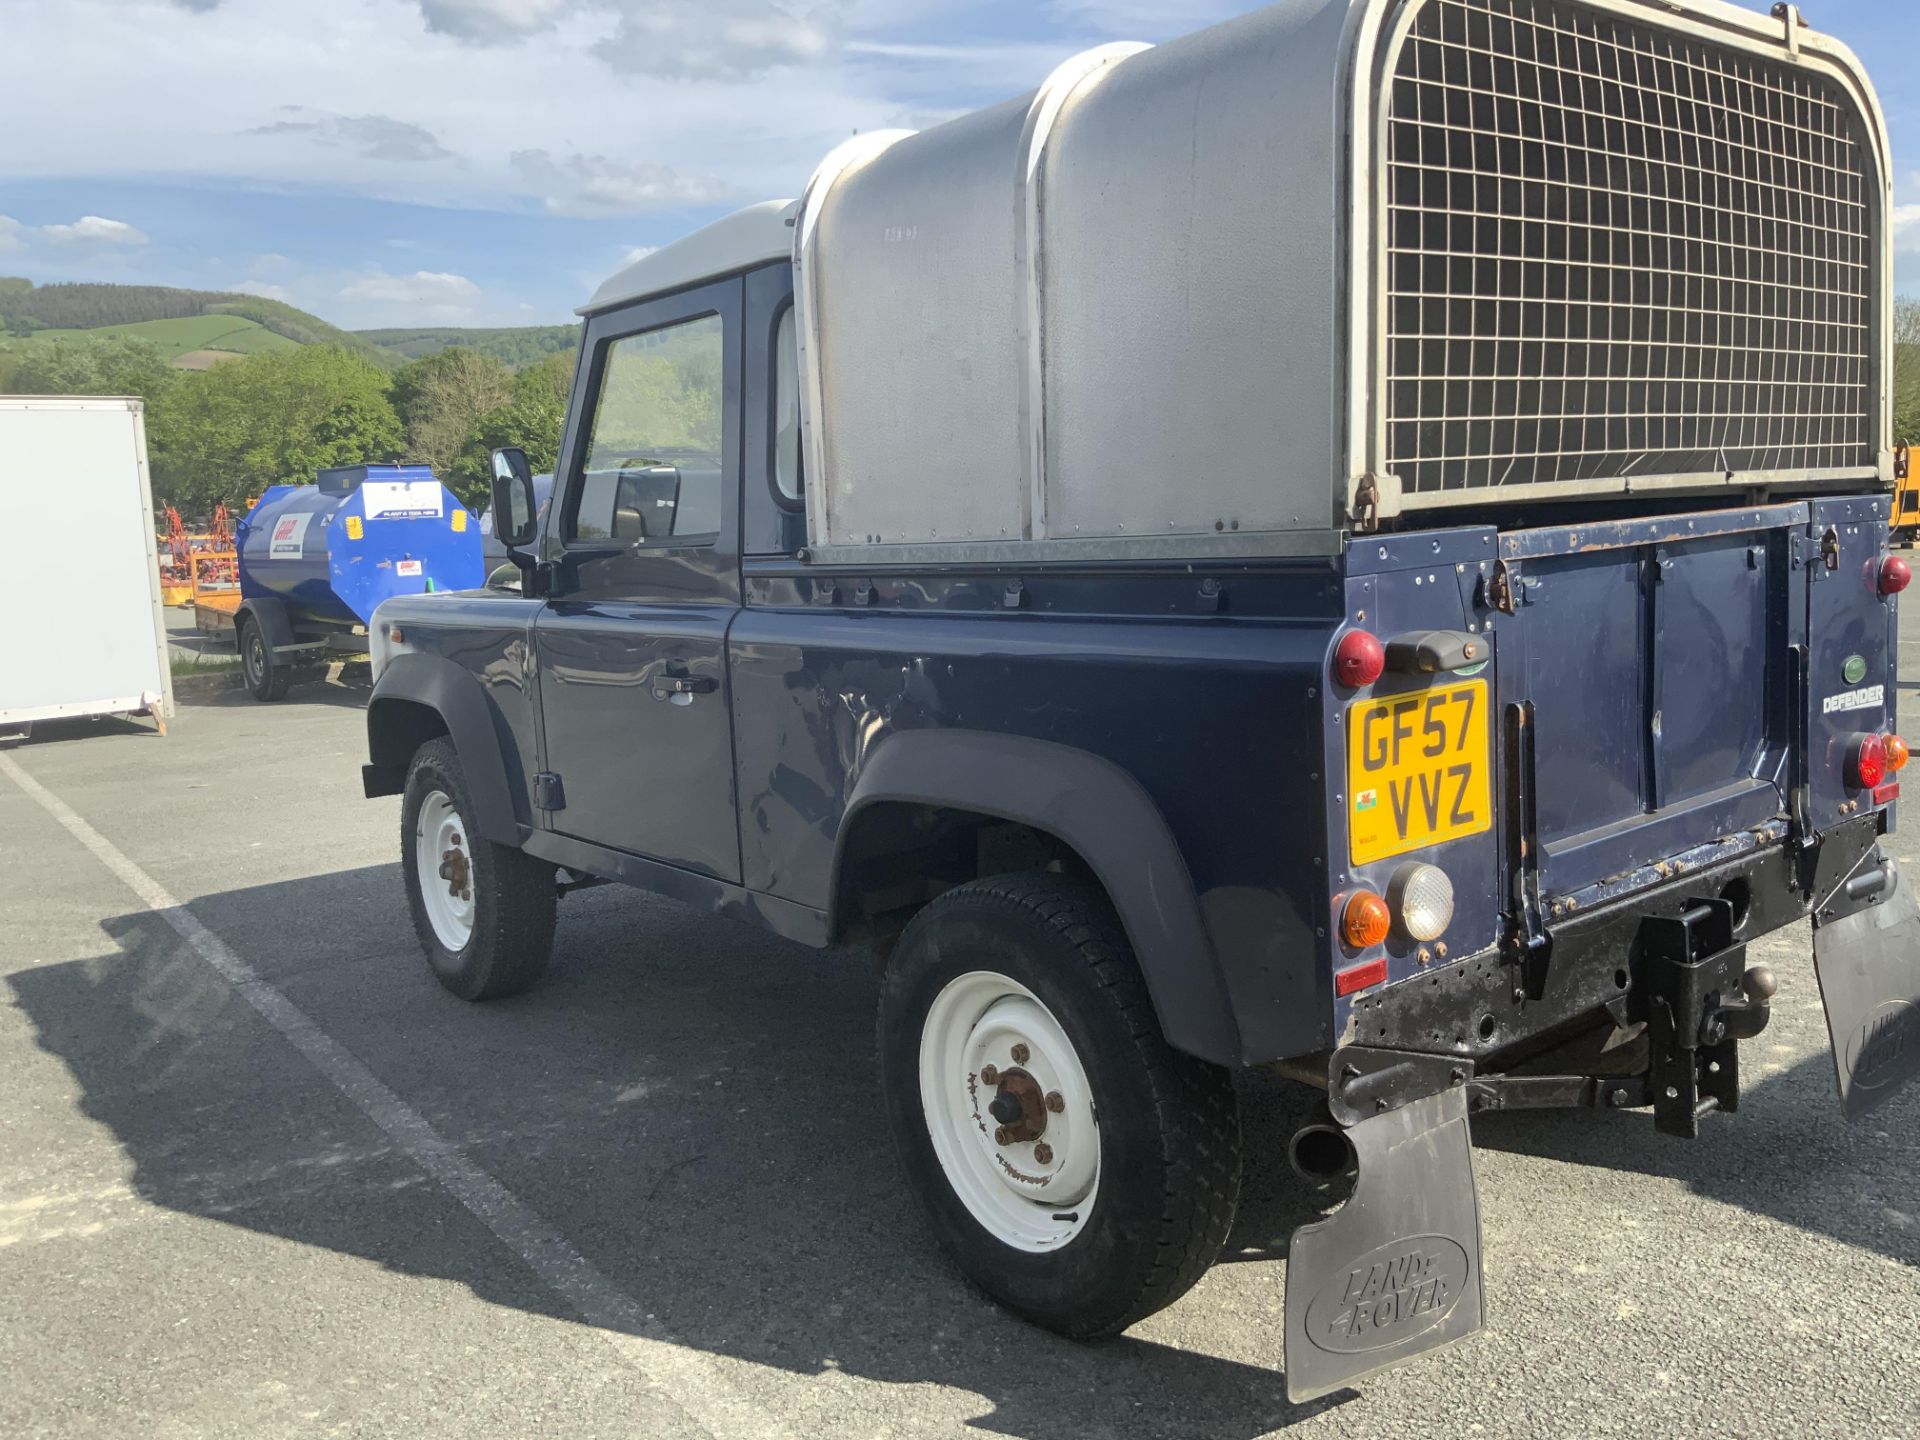 LANDROVER DEFENDER 90. TRUCKCAB - Image 3 of 6